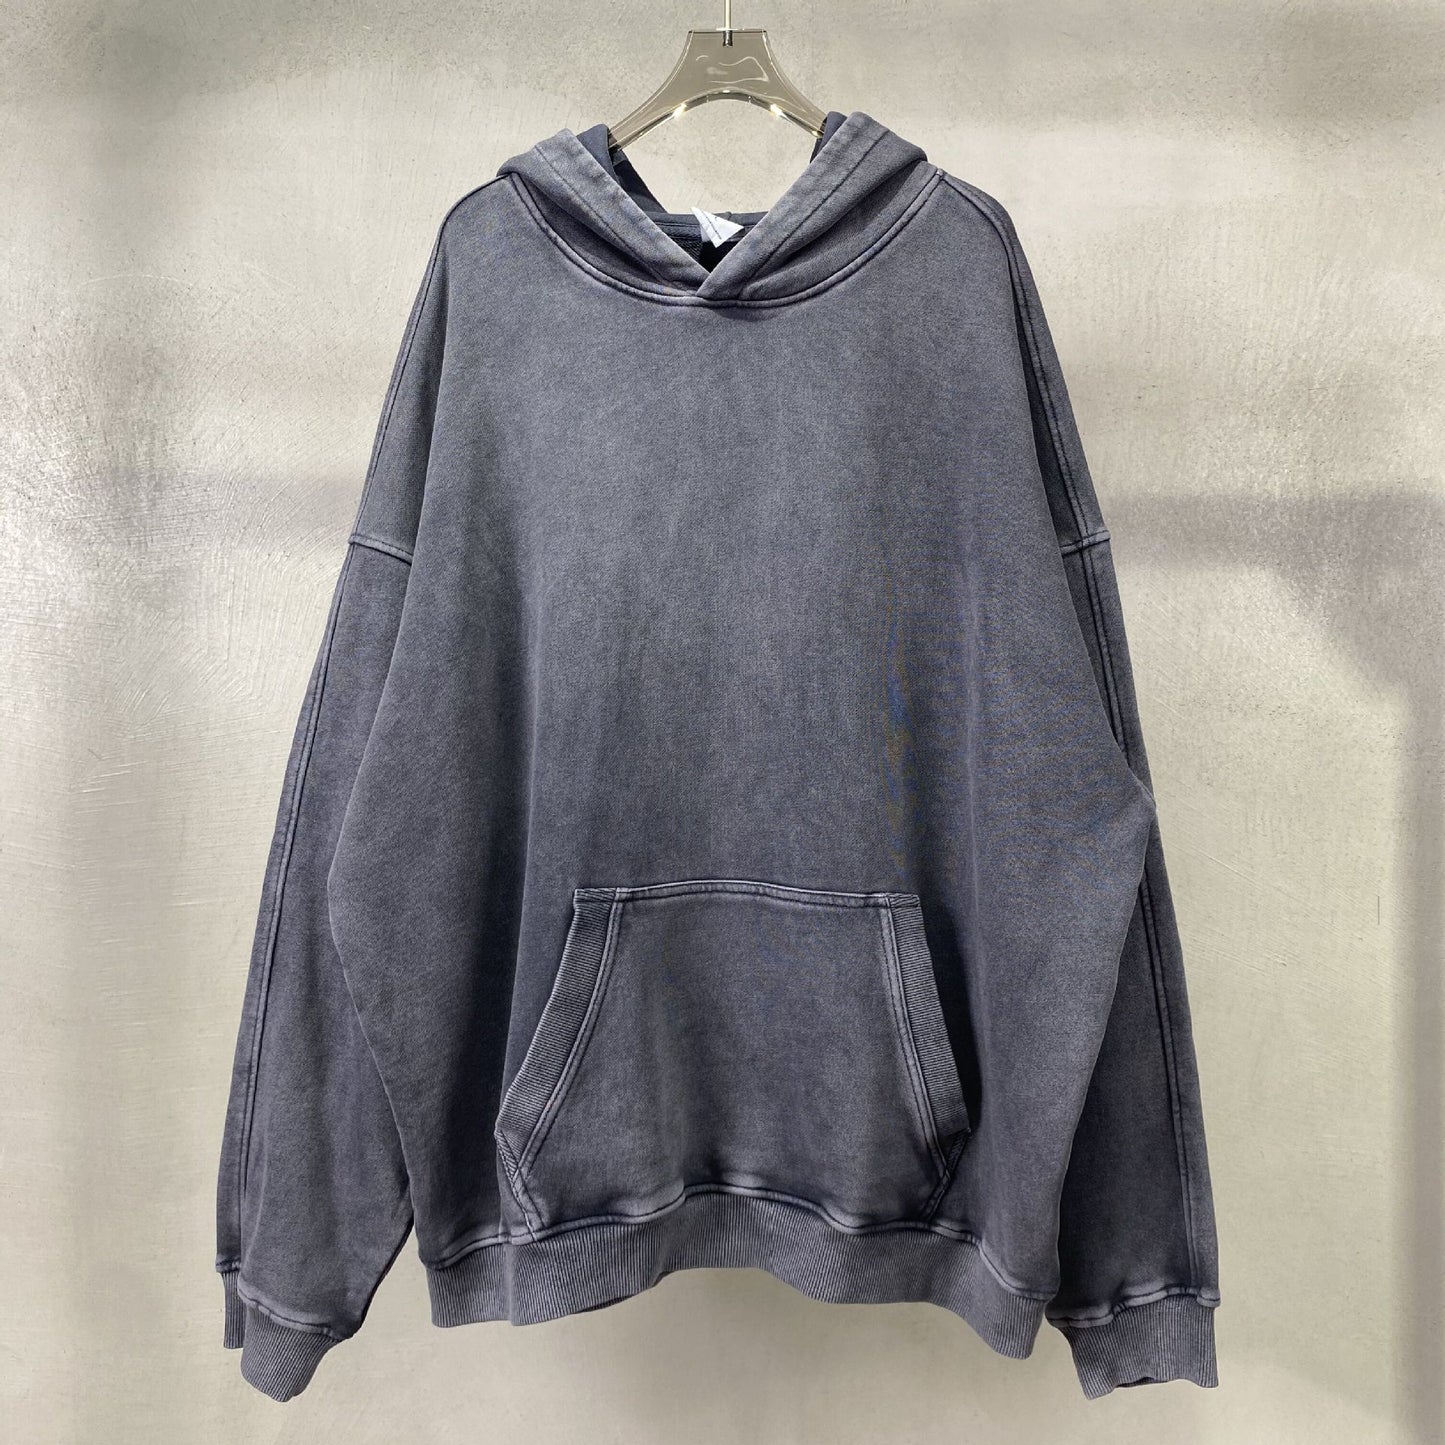 Retro Distressed Hooded Sweater